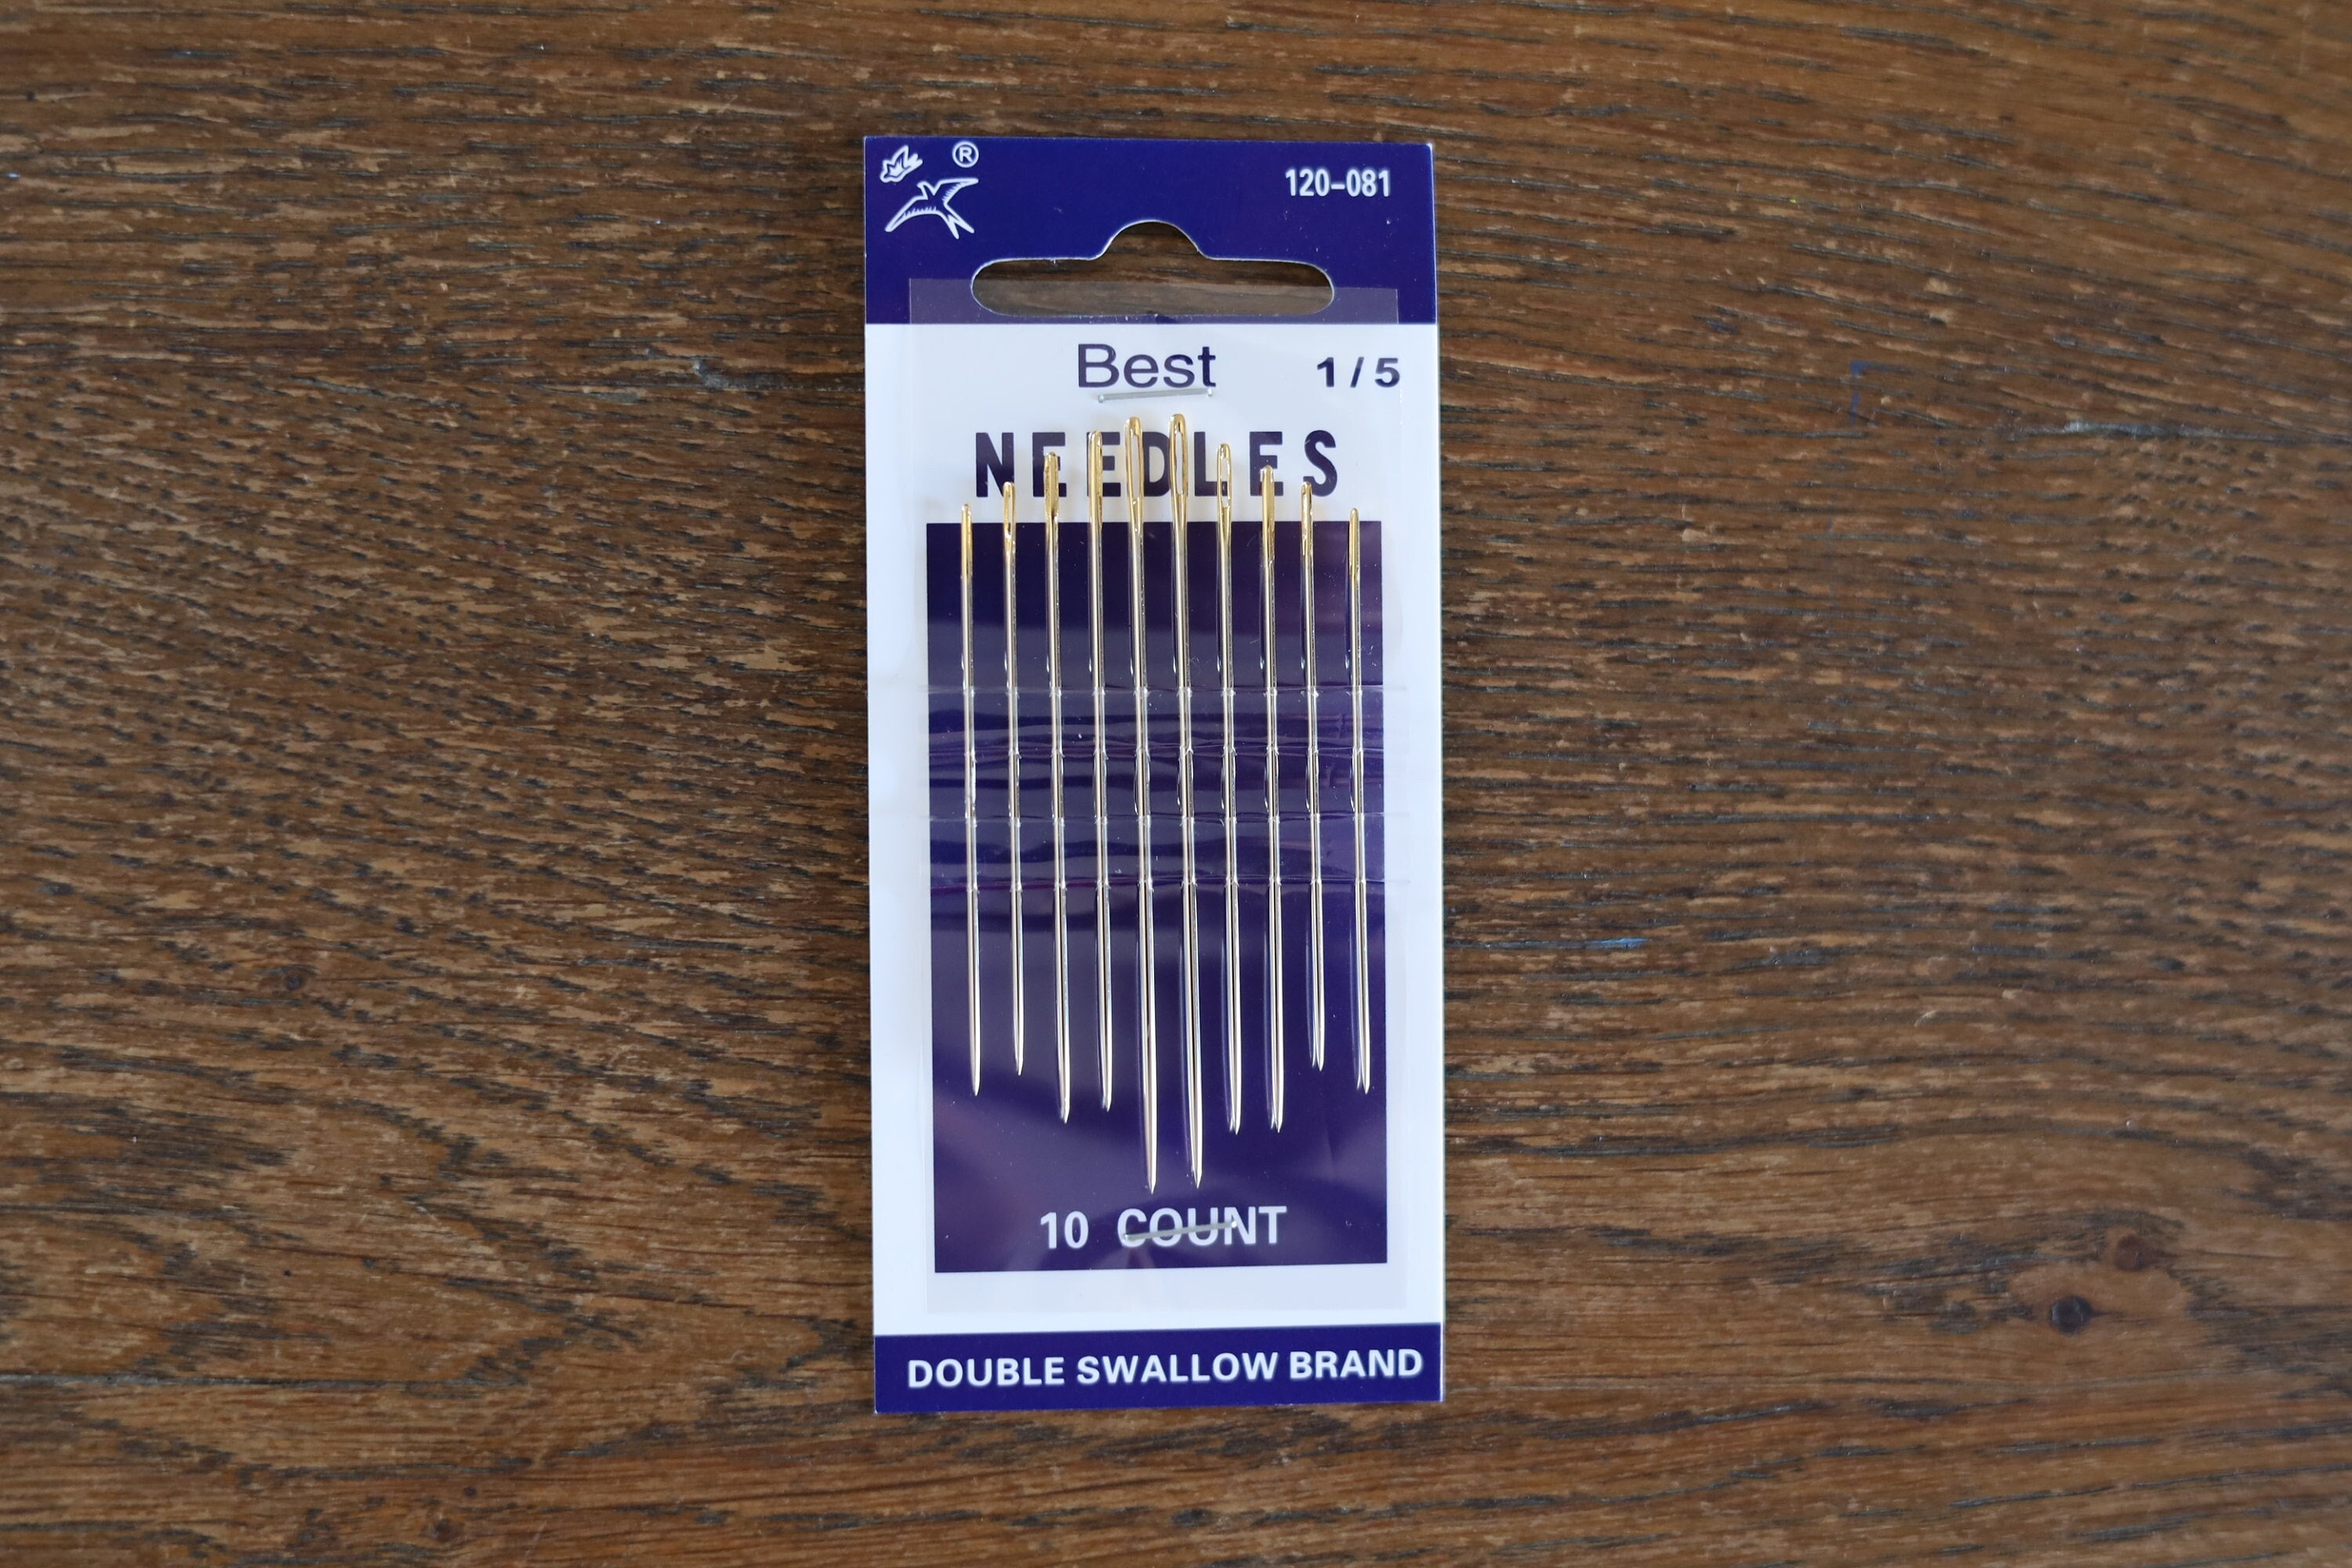 Crafty Hand Sewing Needles Chenille Embroidery Tapestry Darning Size 18  Large x5